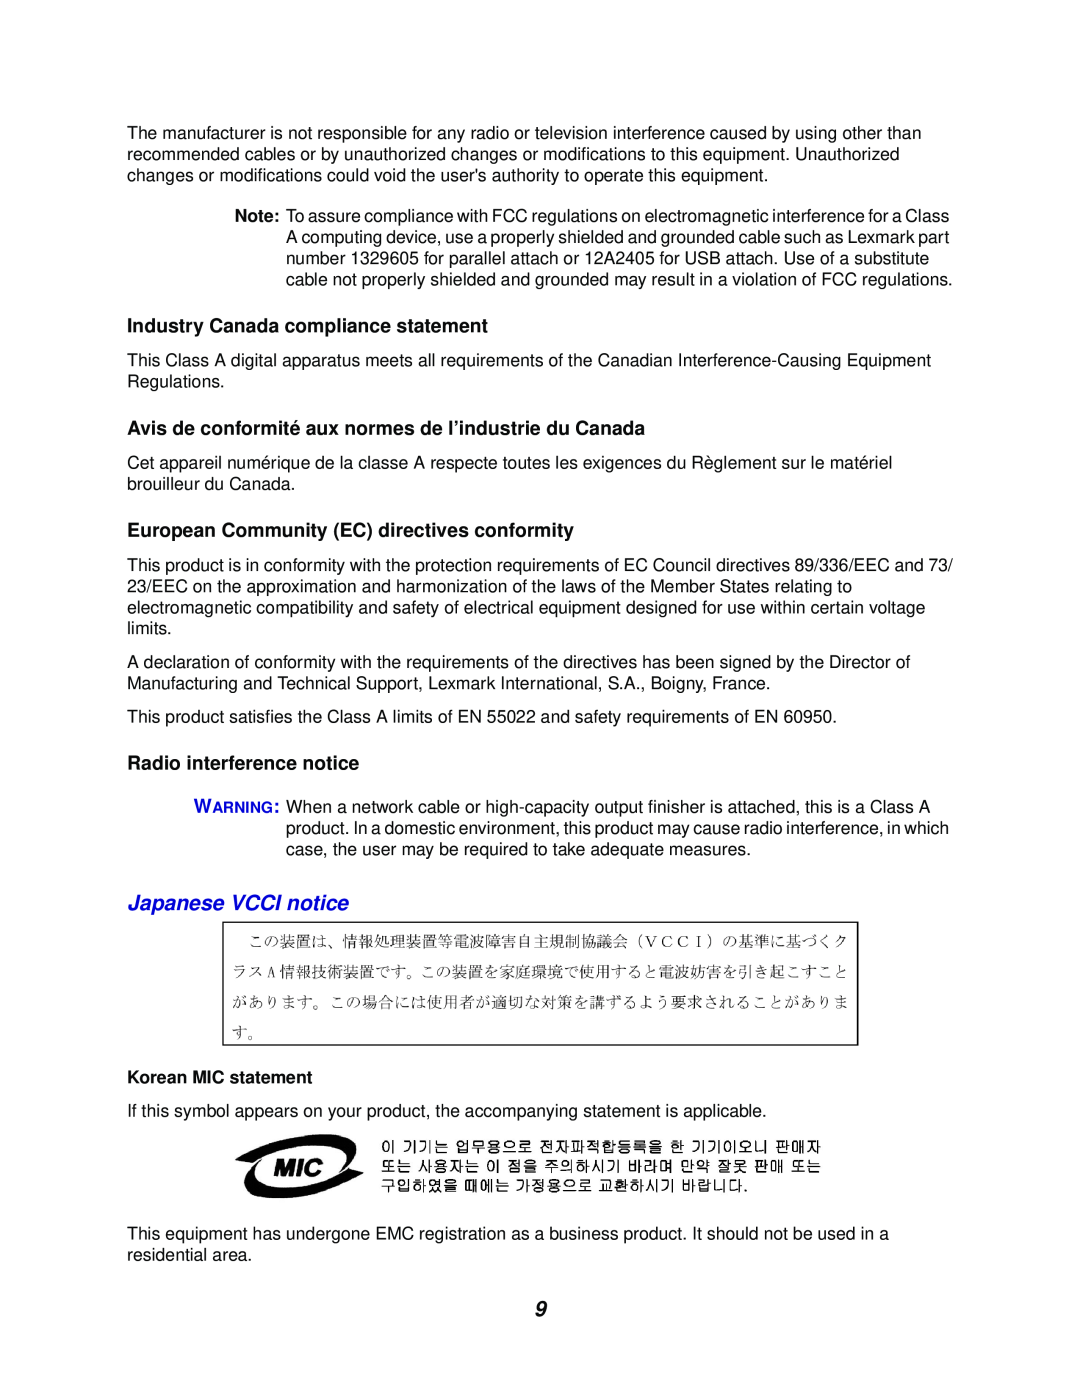 Lexmark 762 manual Japanese VCCI notice, Industry Canada compliance statement, European Community EC directives conformity 